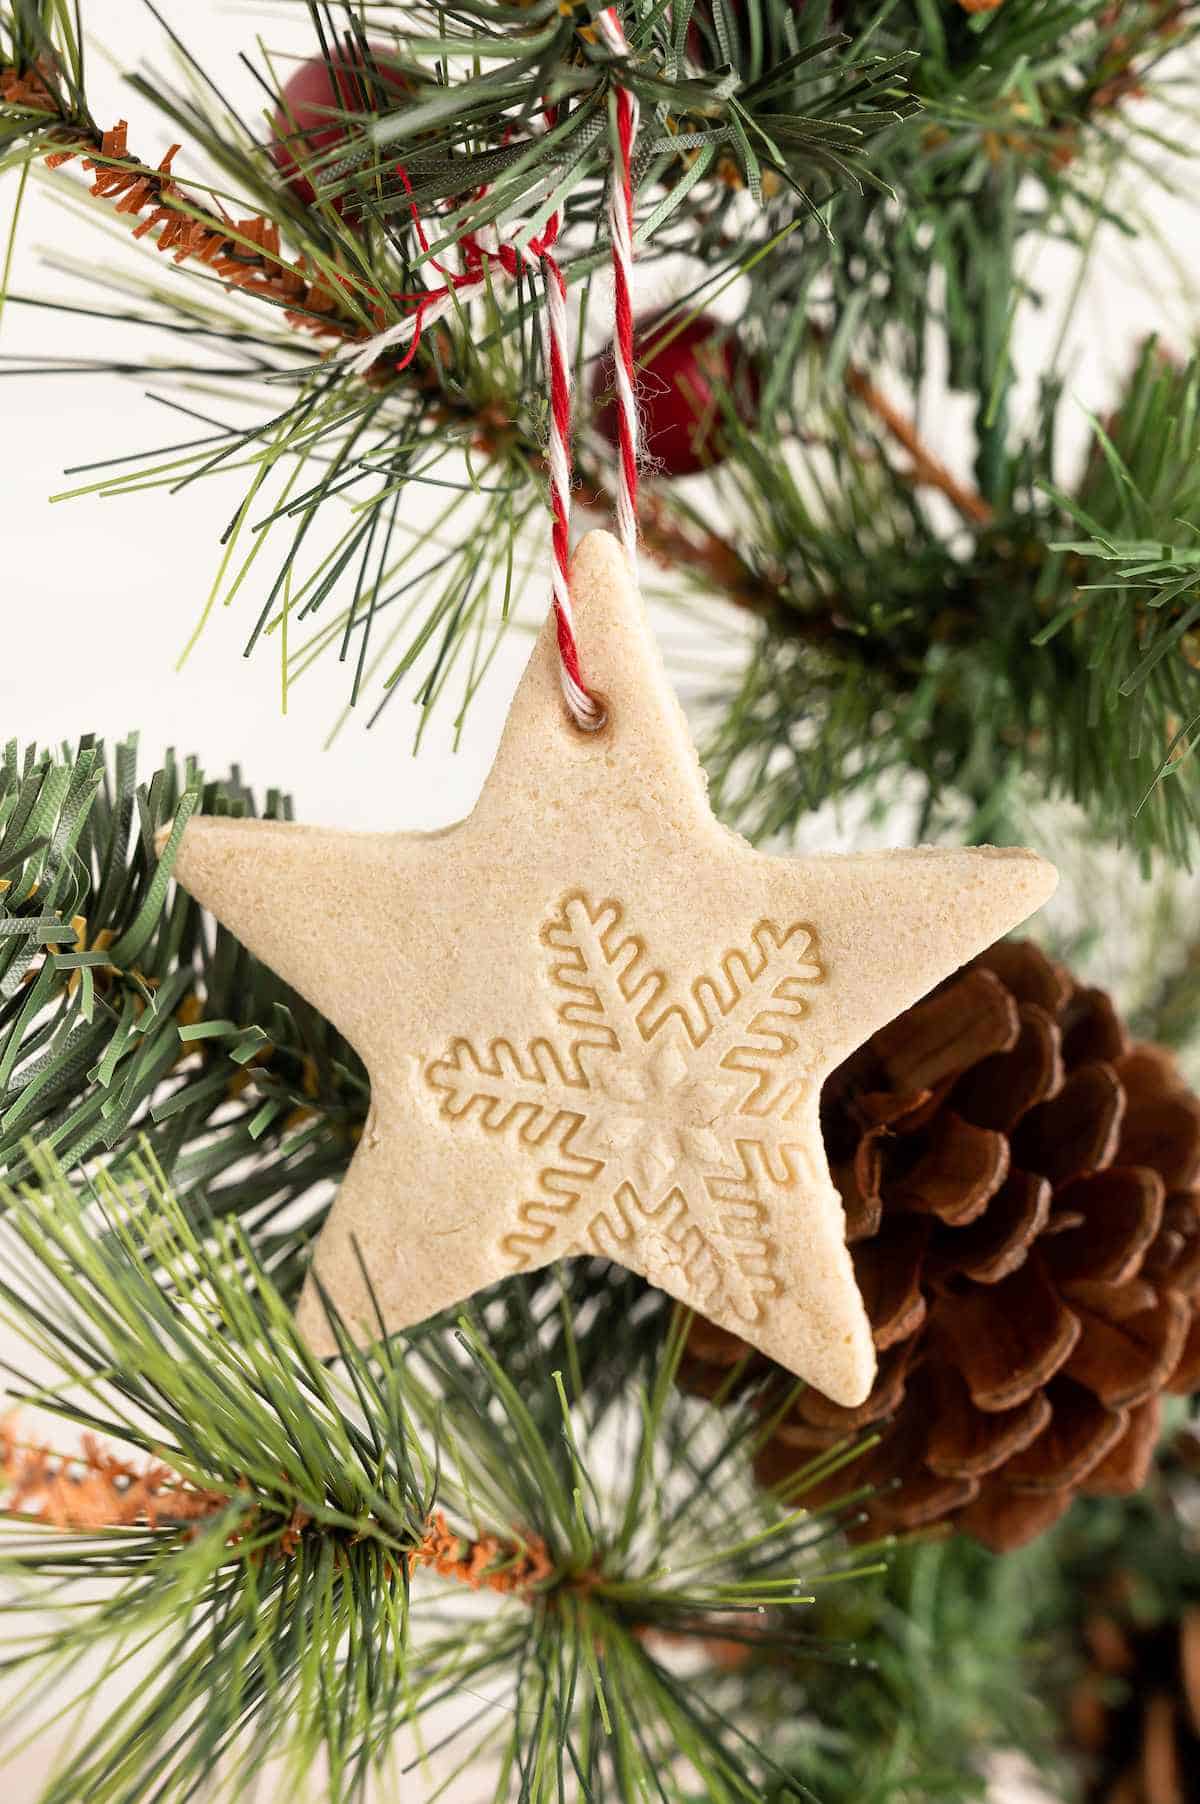 Salt dough ornament shaped like a star, hanging on a tree branch.